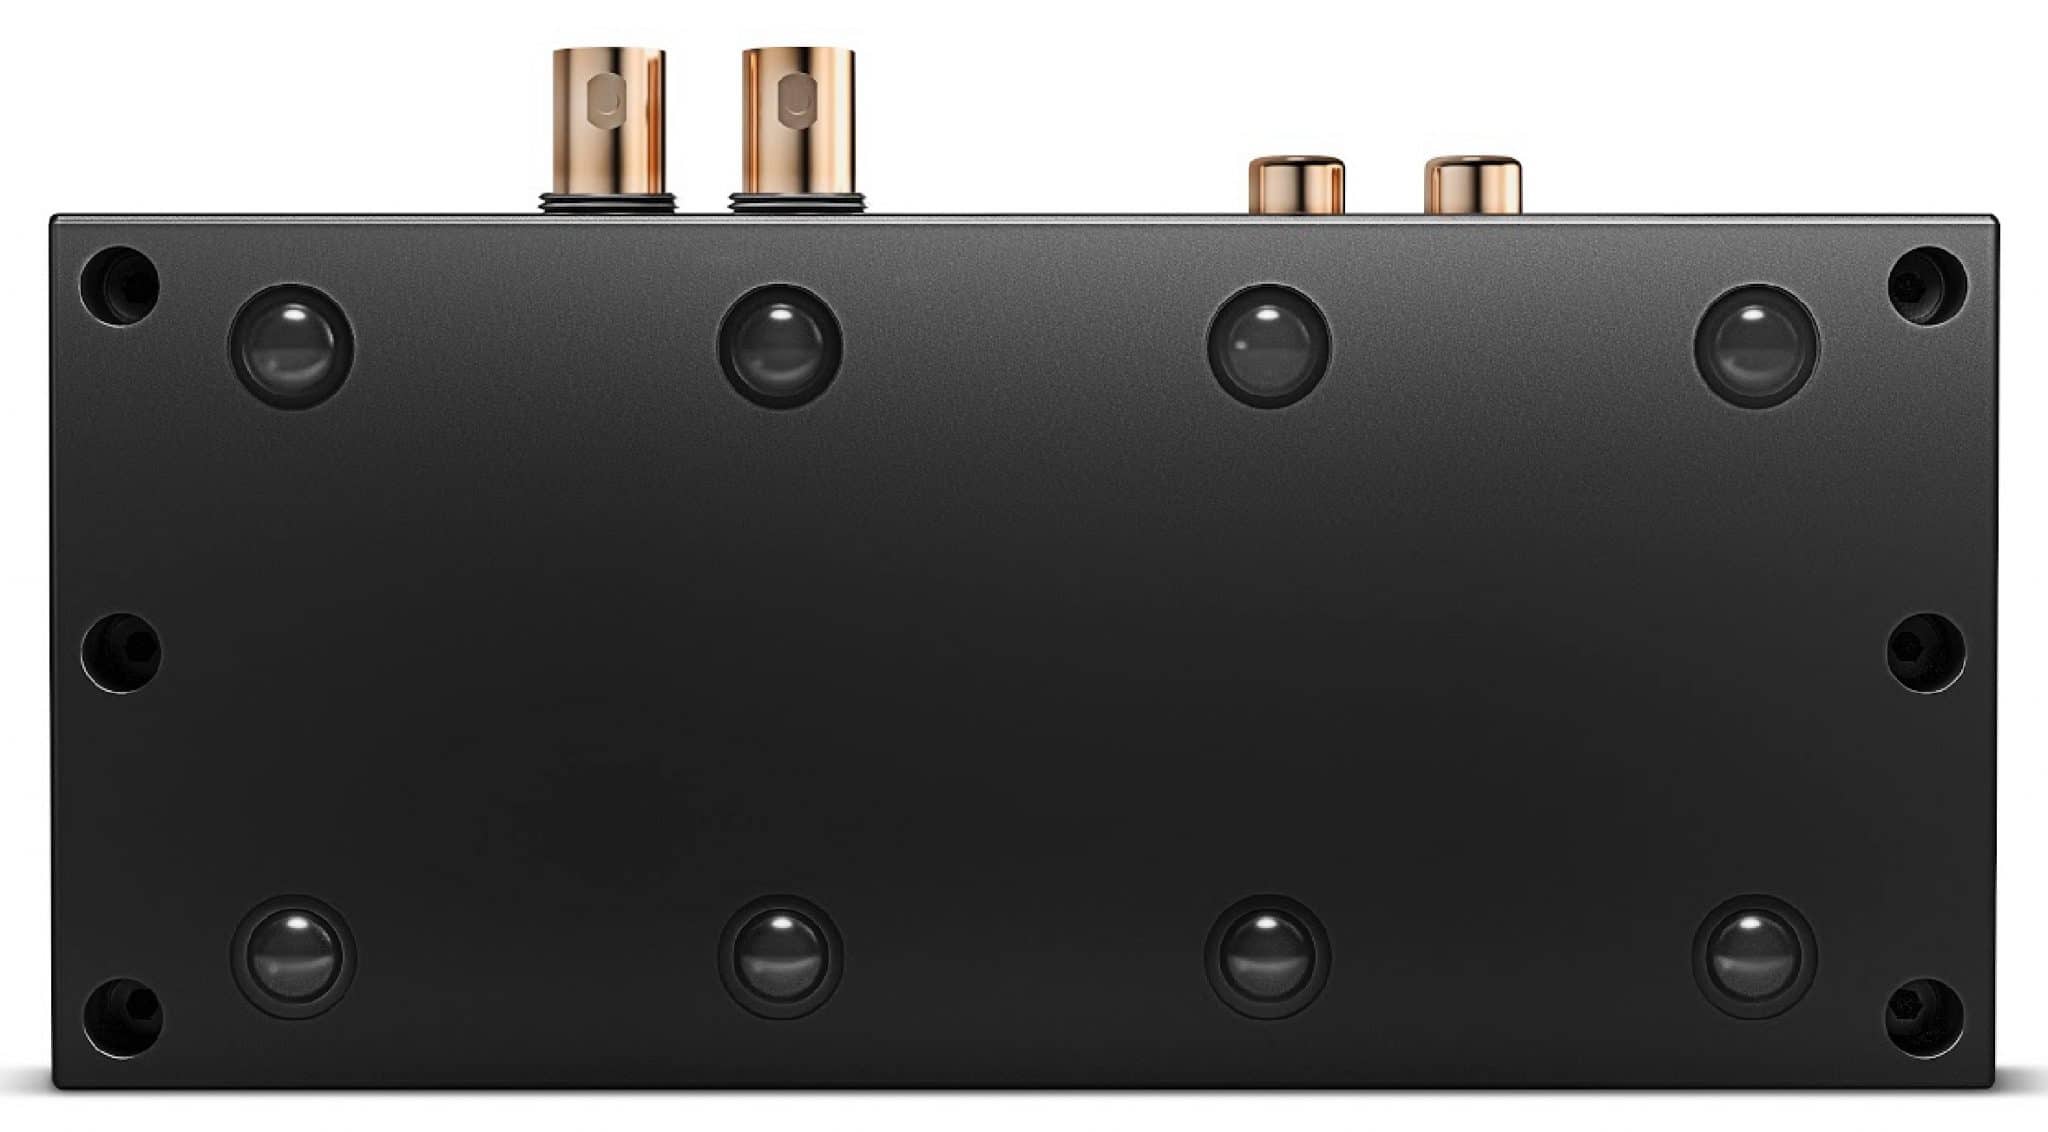 Chord Electronics Qutest DAC: For Home Audio